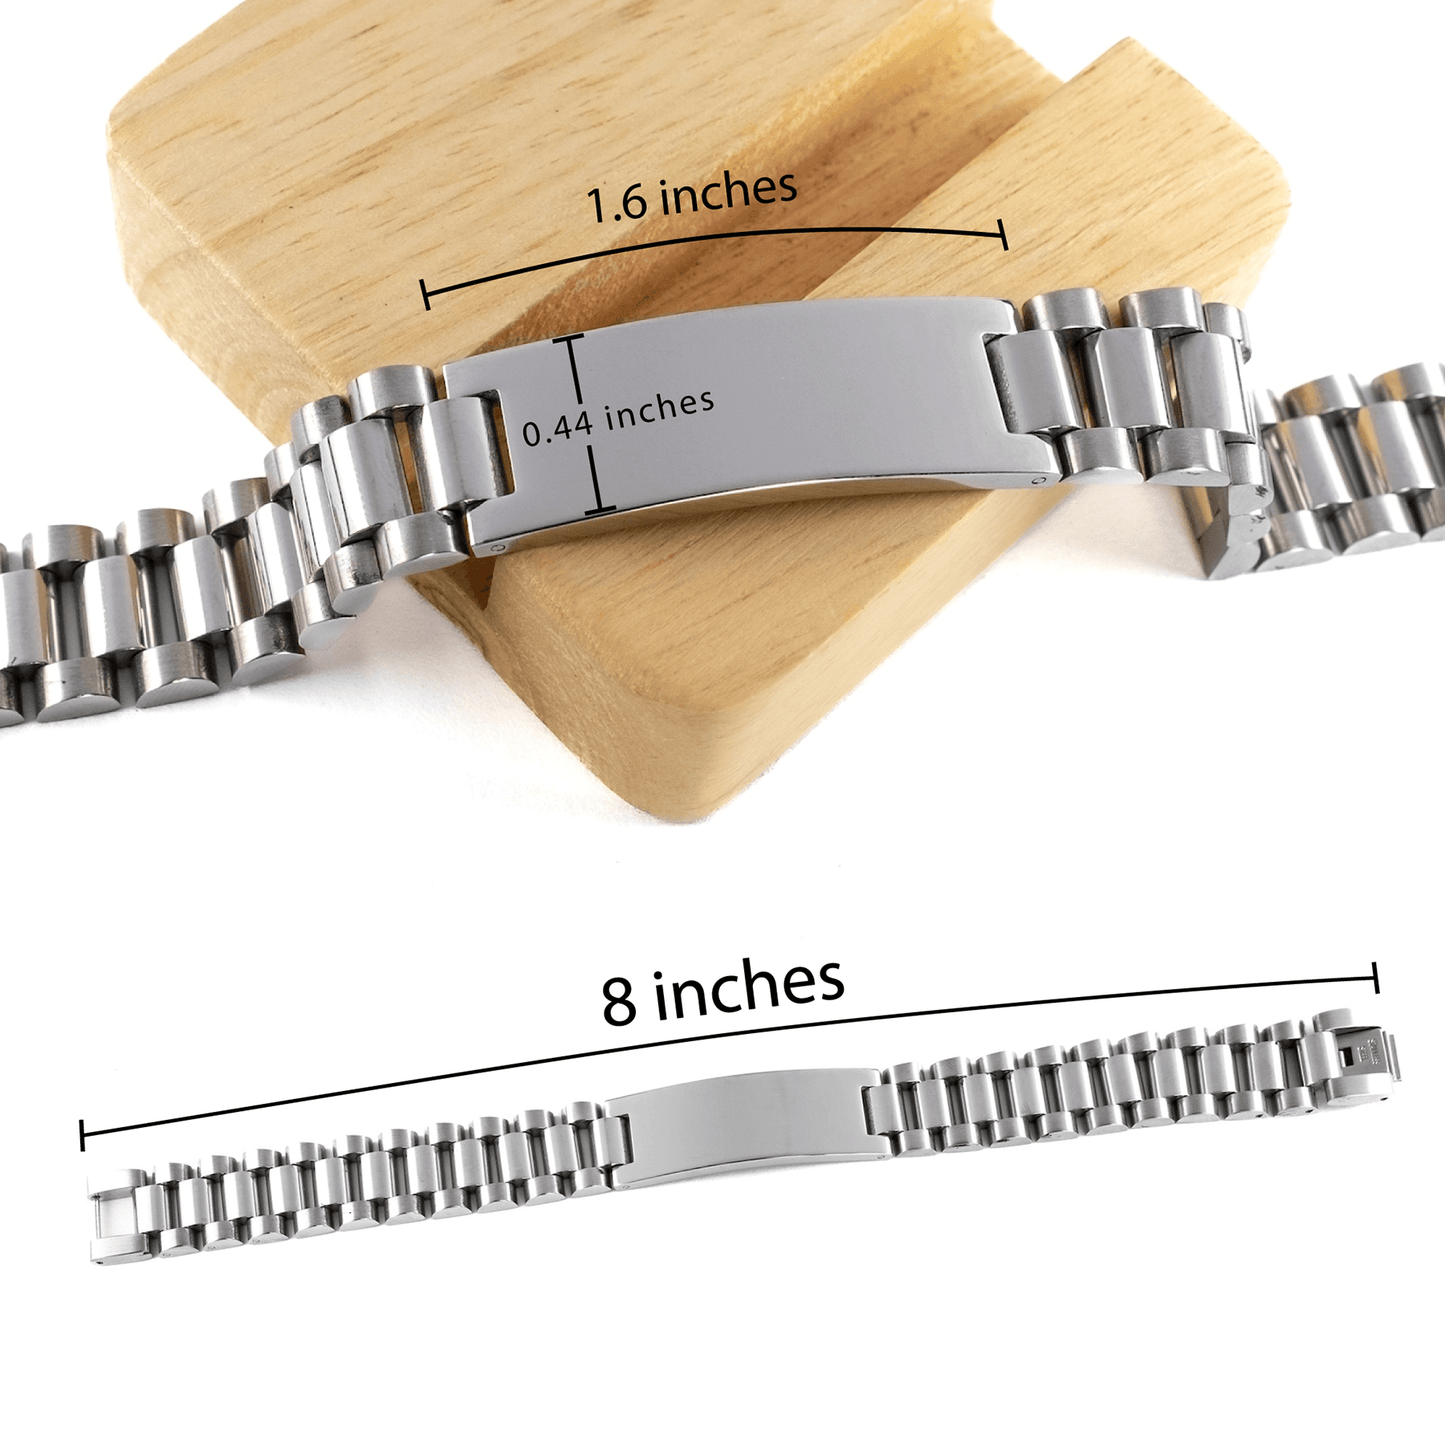 Girlfriend Christmas Perfect Gifts, Girlfriend Ladder Stainless Steel Bracelet, Motivational Girlfriend Engraved Gifts, Birthday Gifts For Girlfriend, To My Girlfriend Life is learning to dance in the rain, finding good in each day. I'm always with you